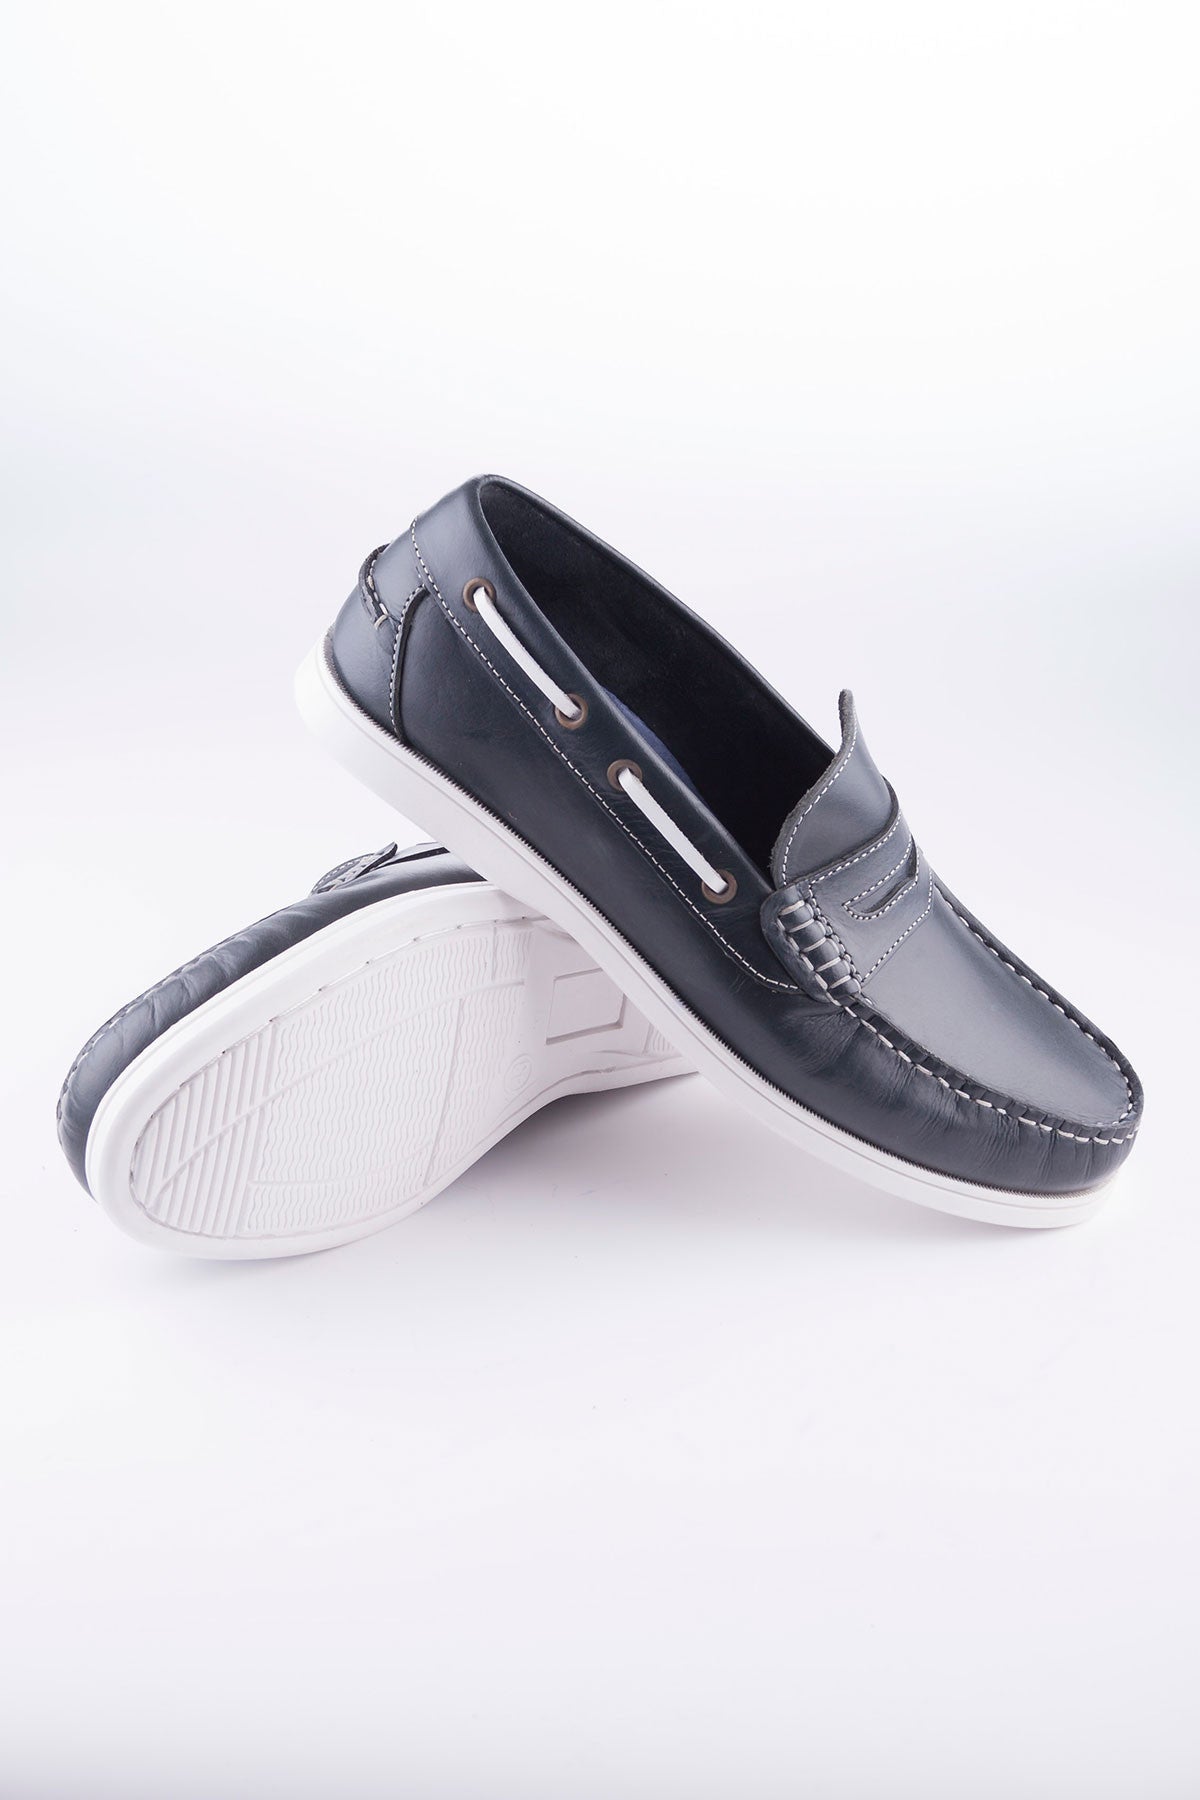 Loafer Leather Deck Shoes UK | Rydale